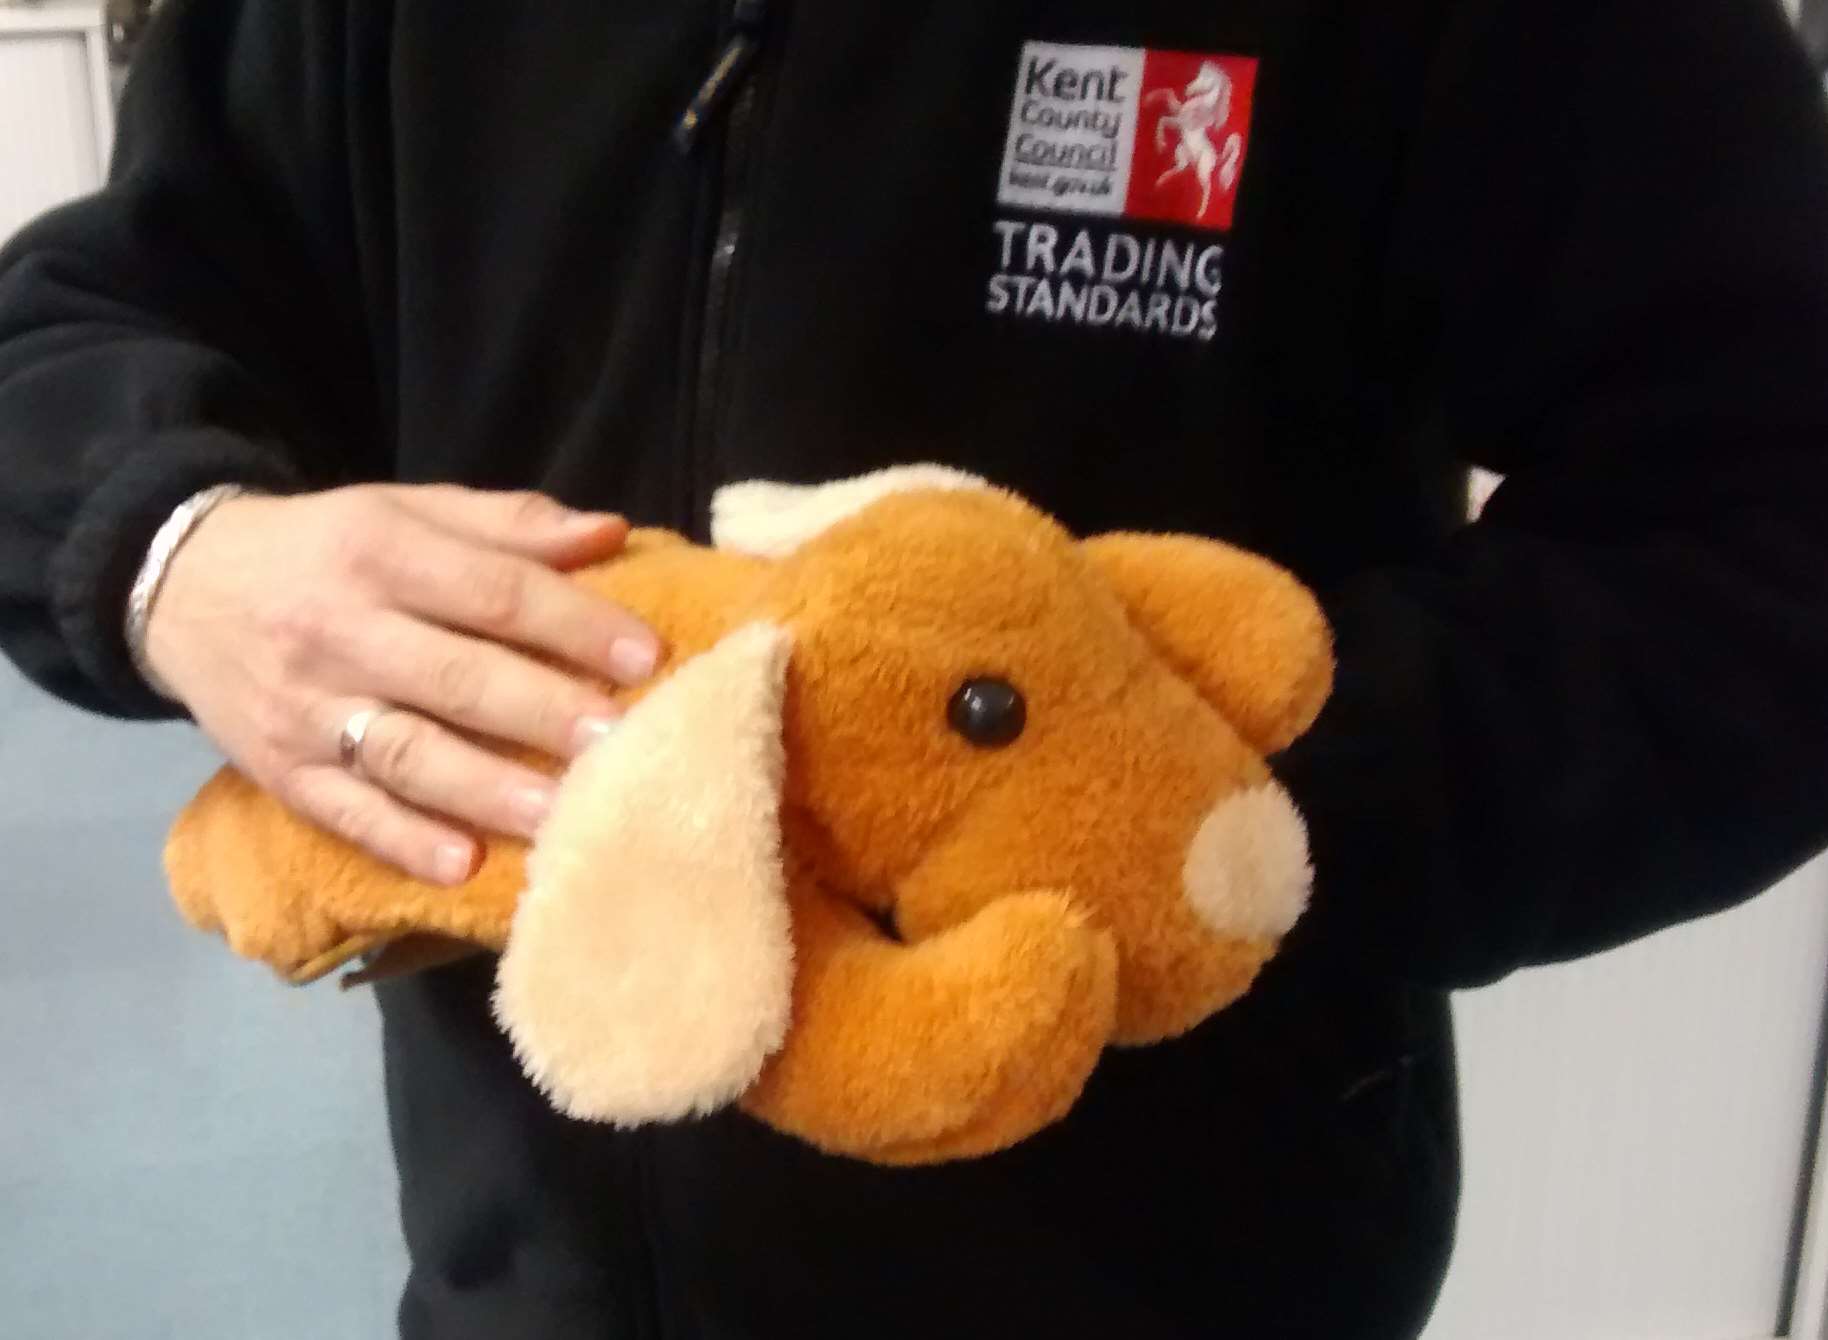 The furry dog hot water bottle seized at Dover